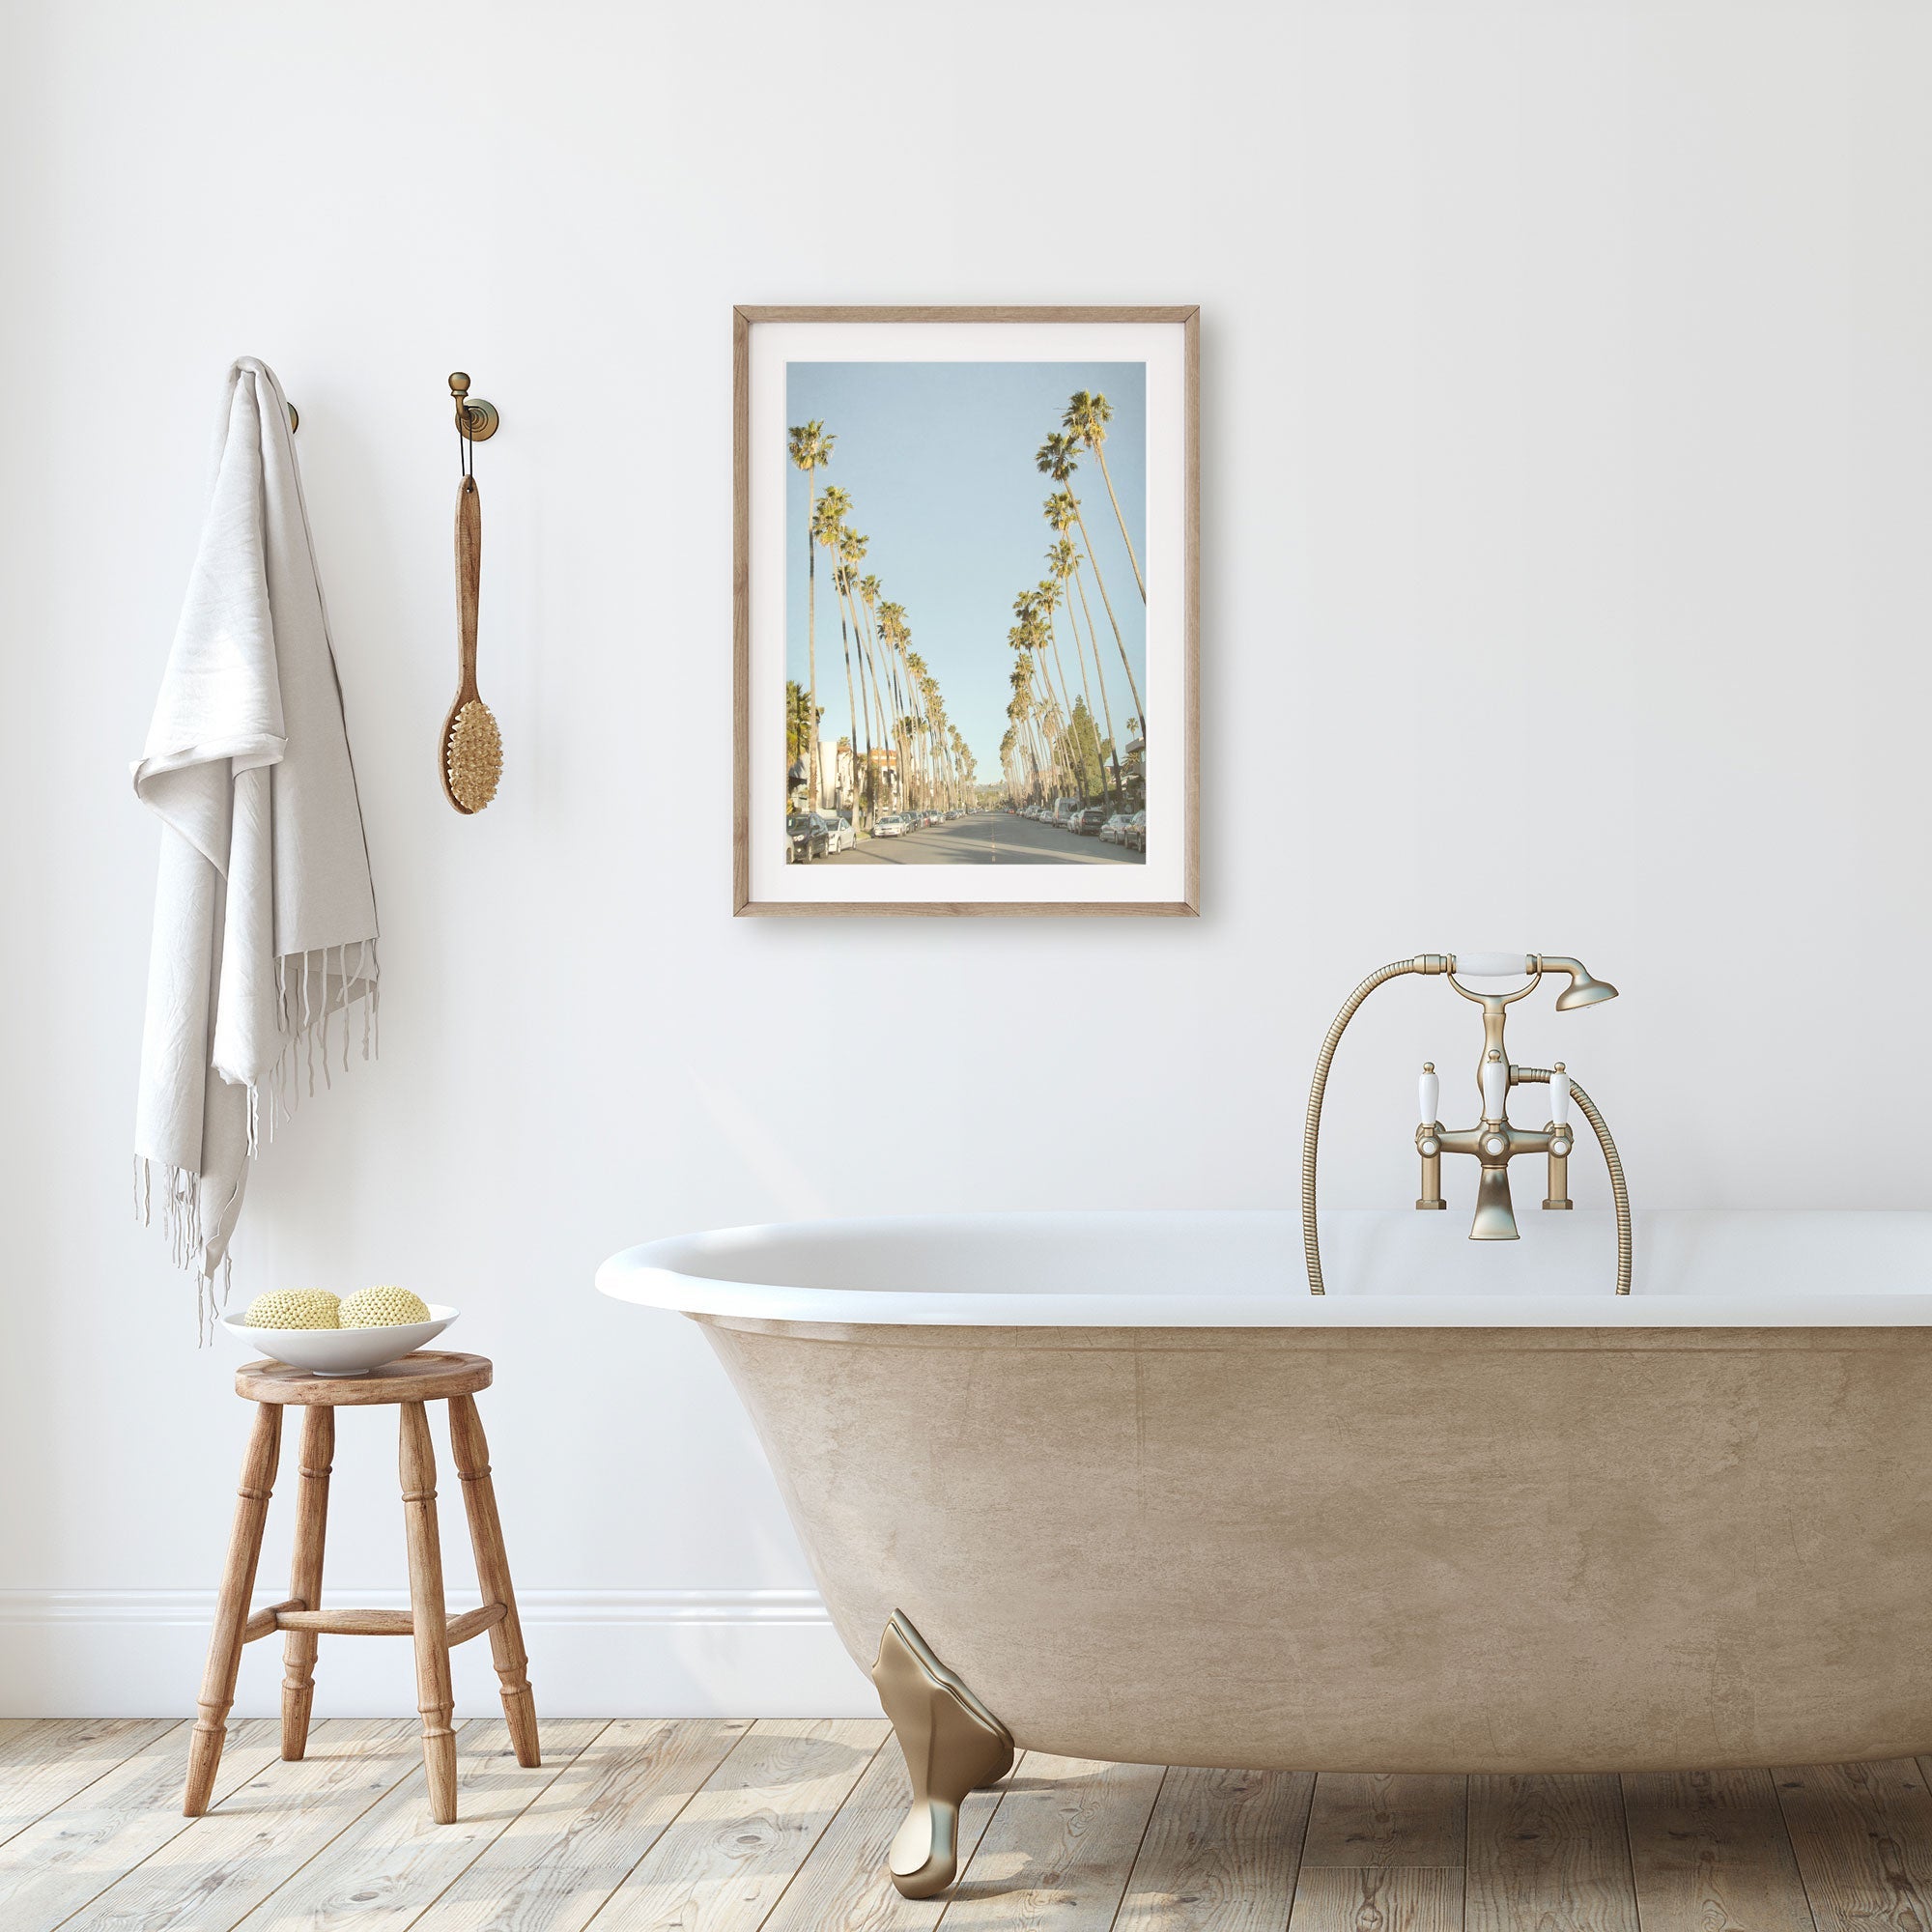 A minimalist bathroom featuring a clawfoot bathtub, golden faucets, a wooden stool with towels, and a framed painting of Los Angeles Palm Tree Lined Street 'Sunset Boulevard Dreams' by Offley Green on the wall.